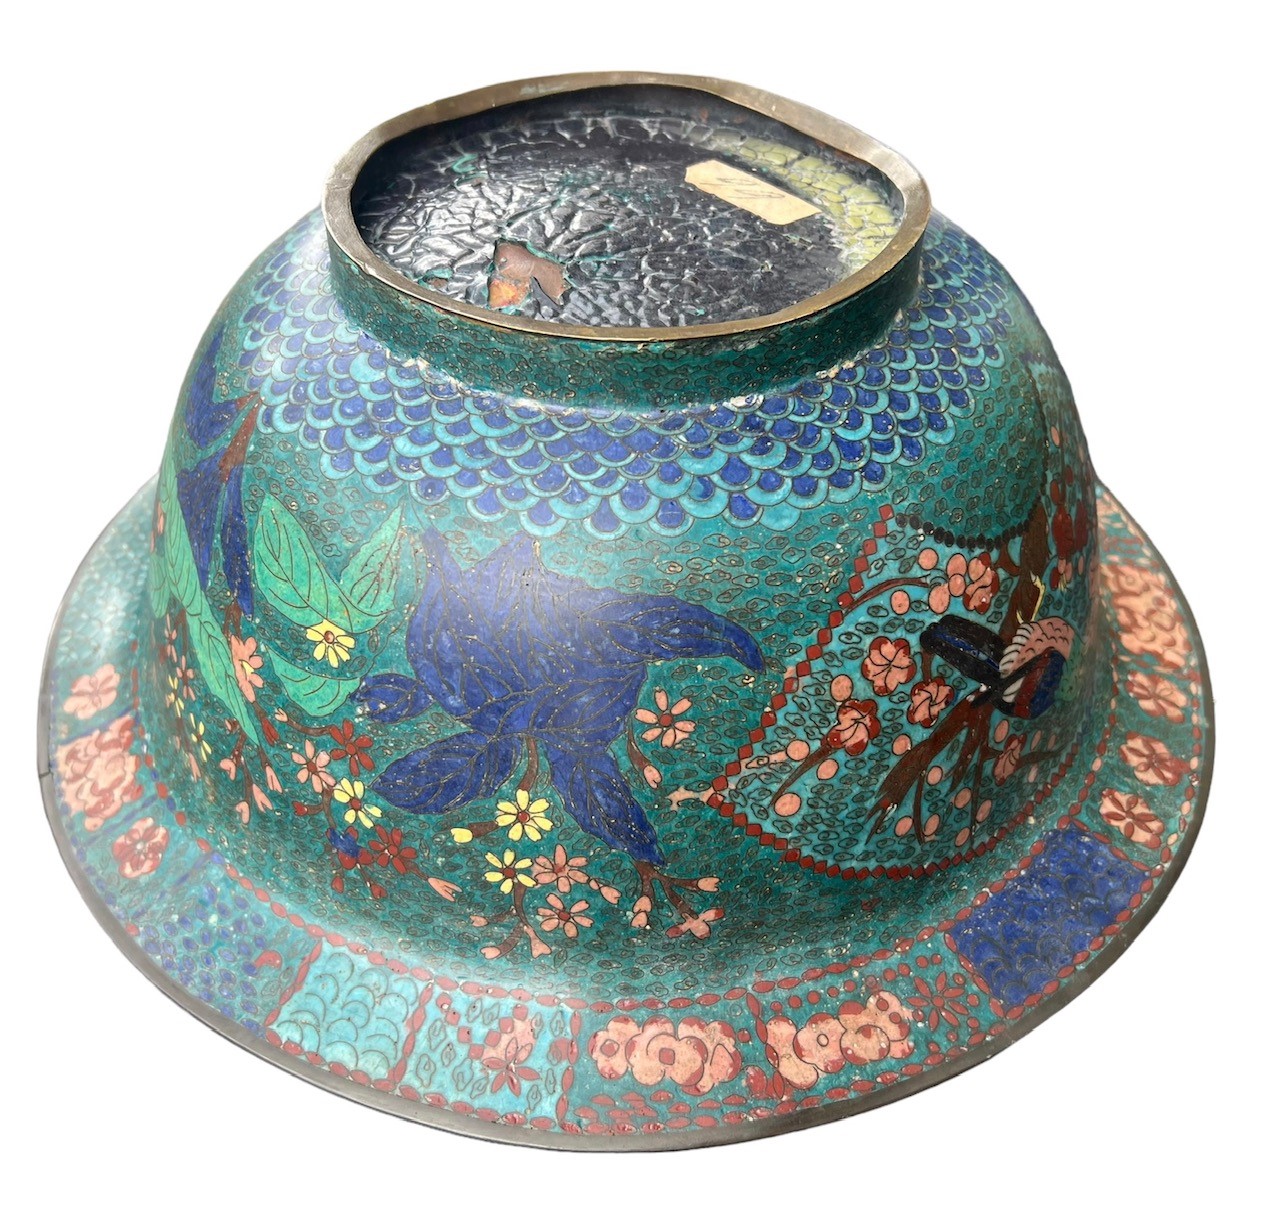 A LARGE CHINESE LATE MING DYNASTY 17TH CENTURY CLOISONNÉ BOWL Of waisted circular form with a flared - Image 5 of 8